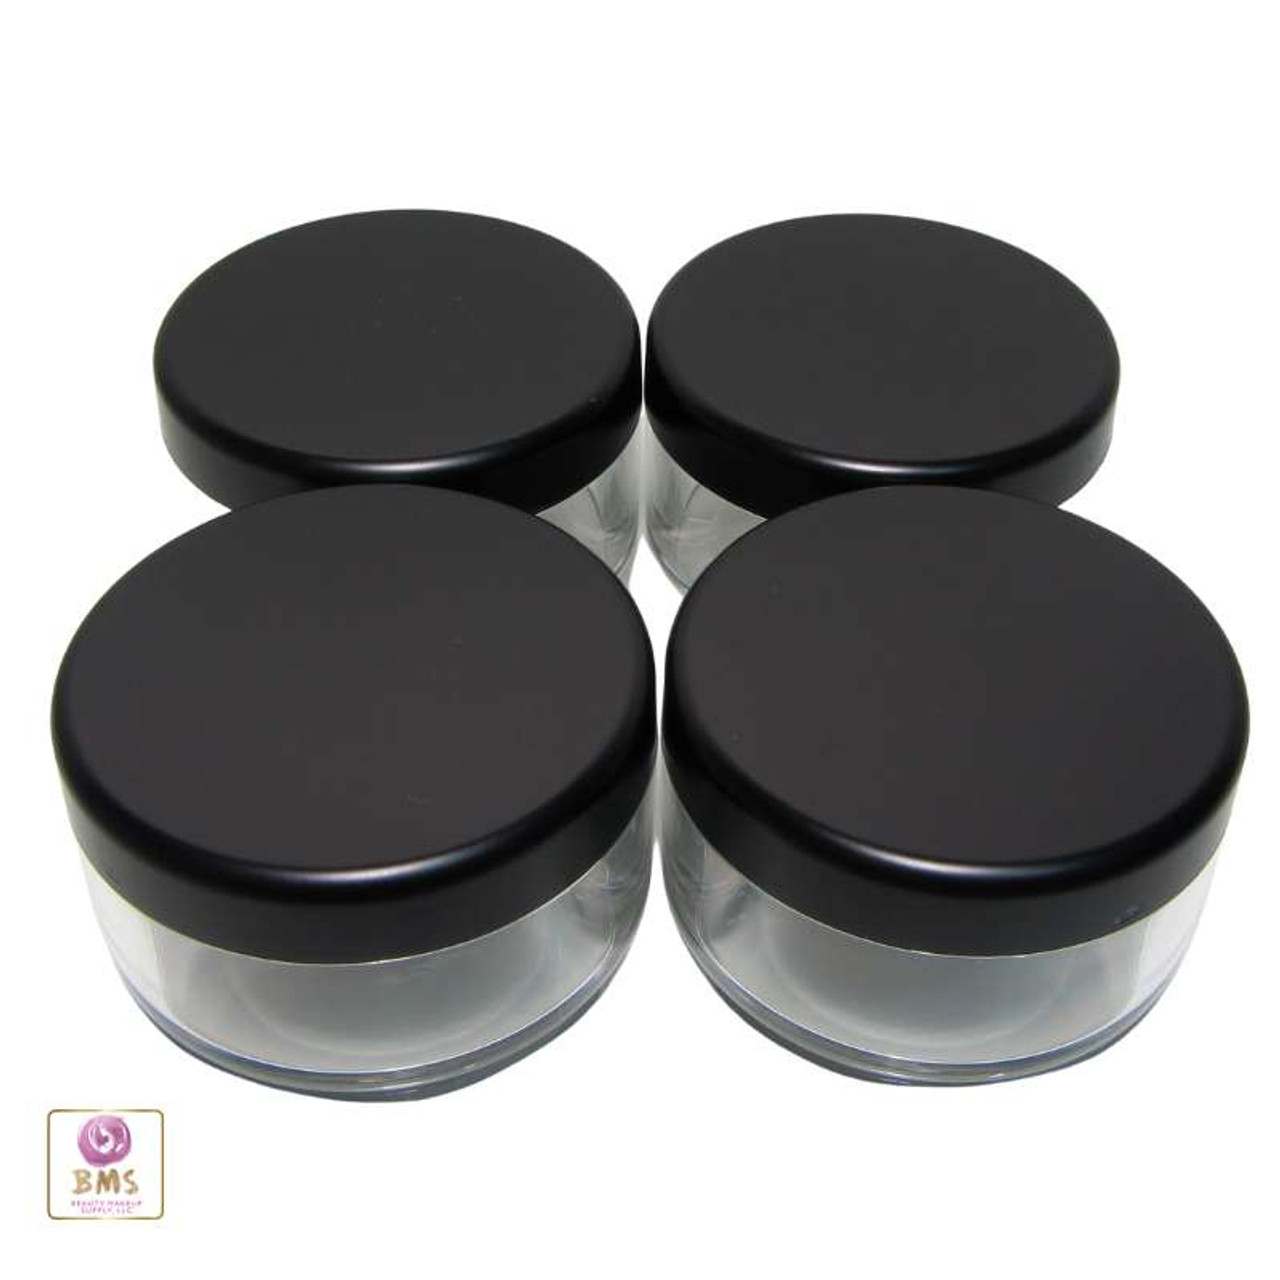 https://cdn11.bigcommerce.com/s-qd7k5gxi/images/stencil/1280x1280/products/438/6952/Cosmetic-Sifter-Jars-Plastic-Beauty-Containers-with-Lids-30-Gram-Matte-Black-Silver-Lid-3073-3035-Beauty-Makeup-Supply_6107__50843.1661390025.jpg?c=2?imbypass=on